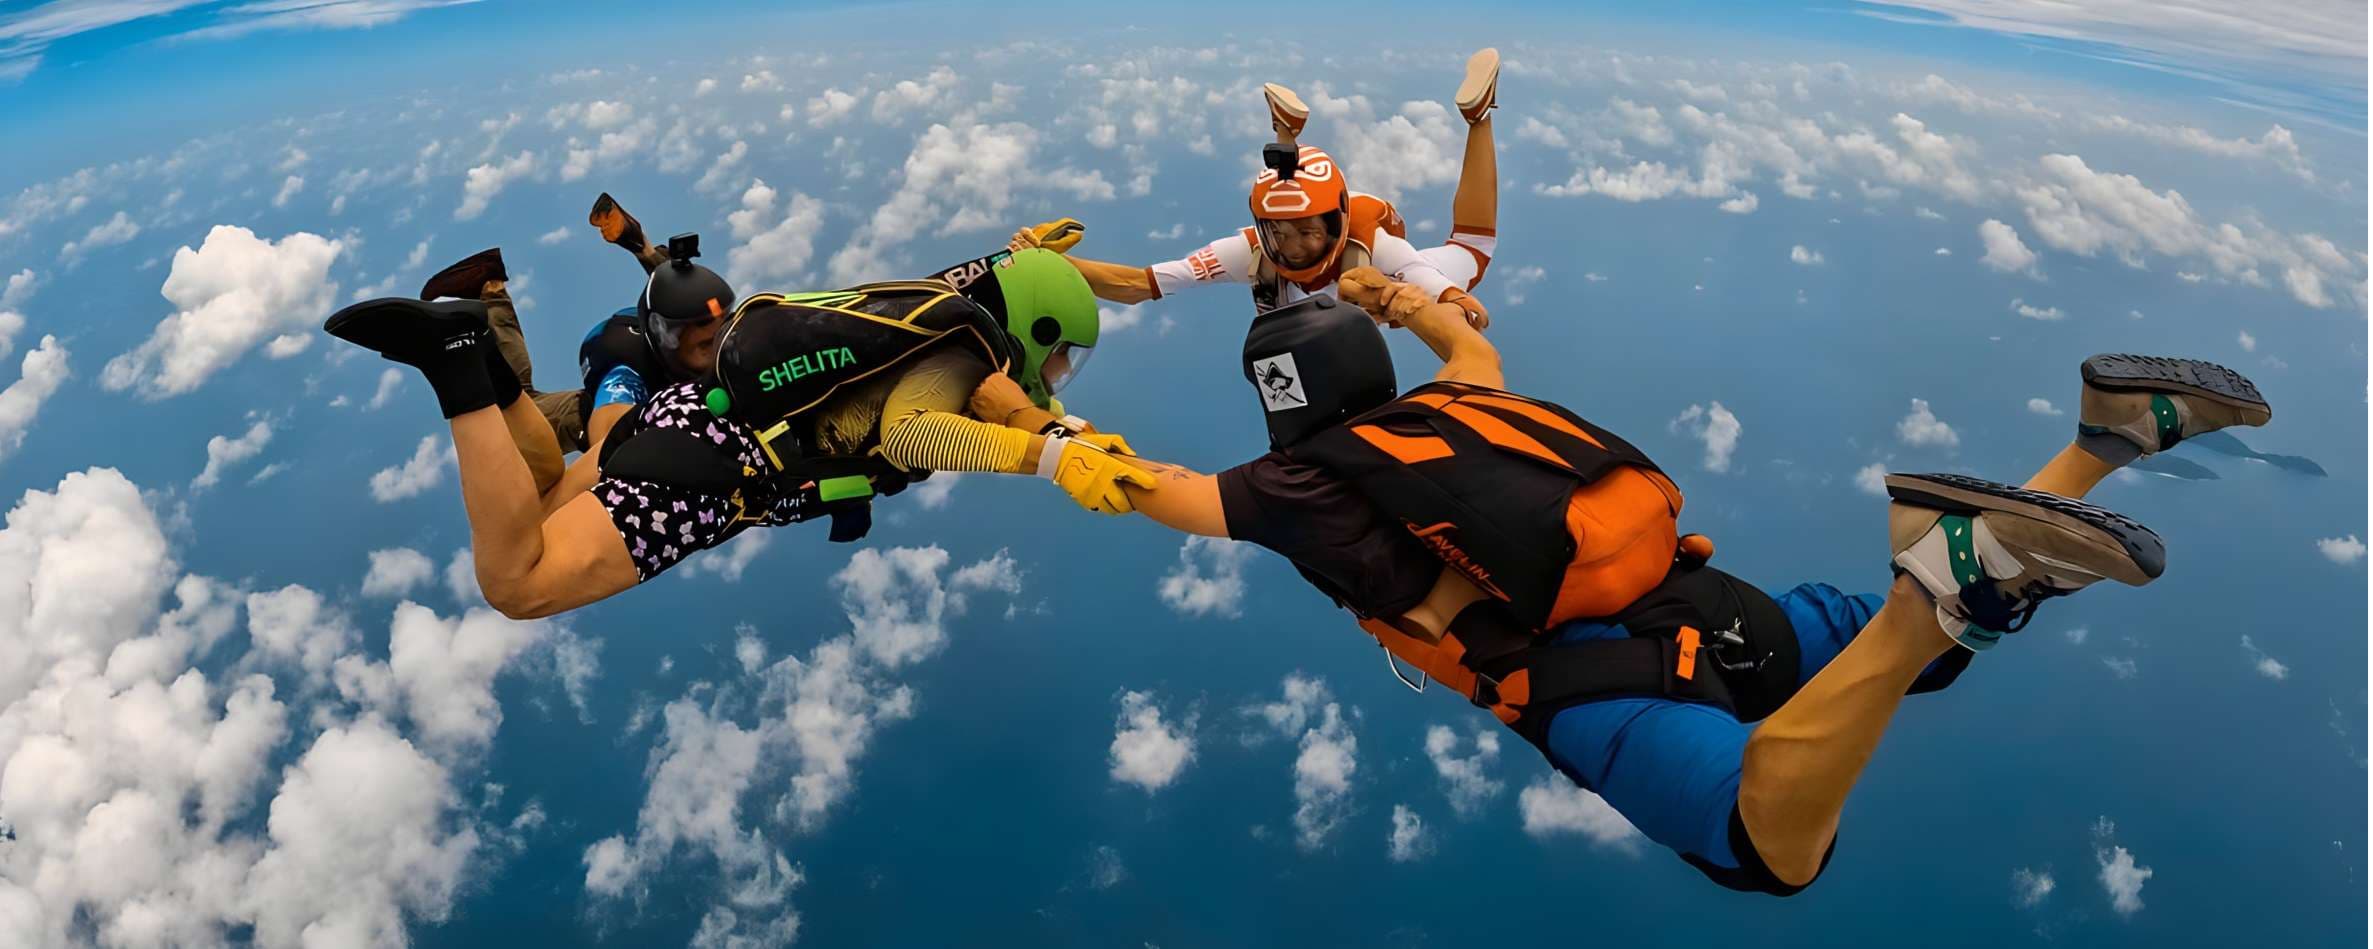 Skydiving & Watersports Center Seychelles Island